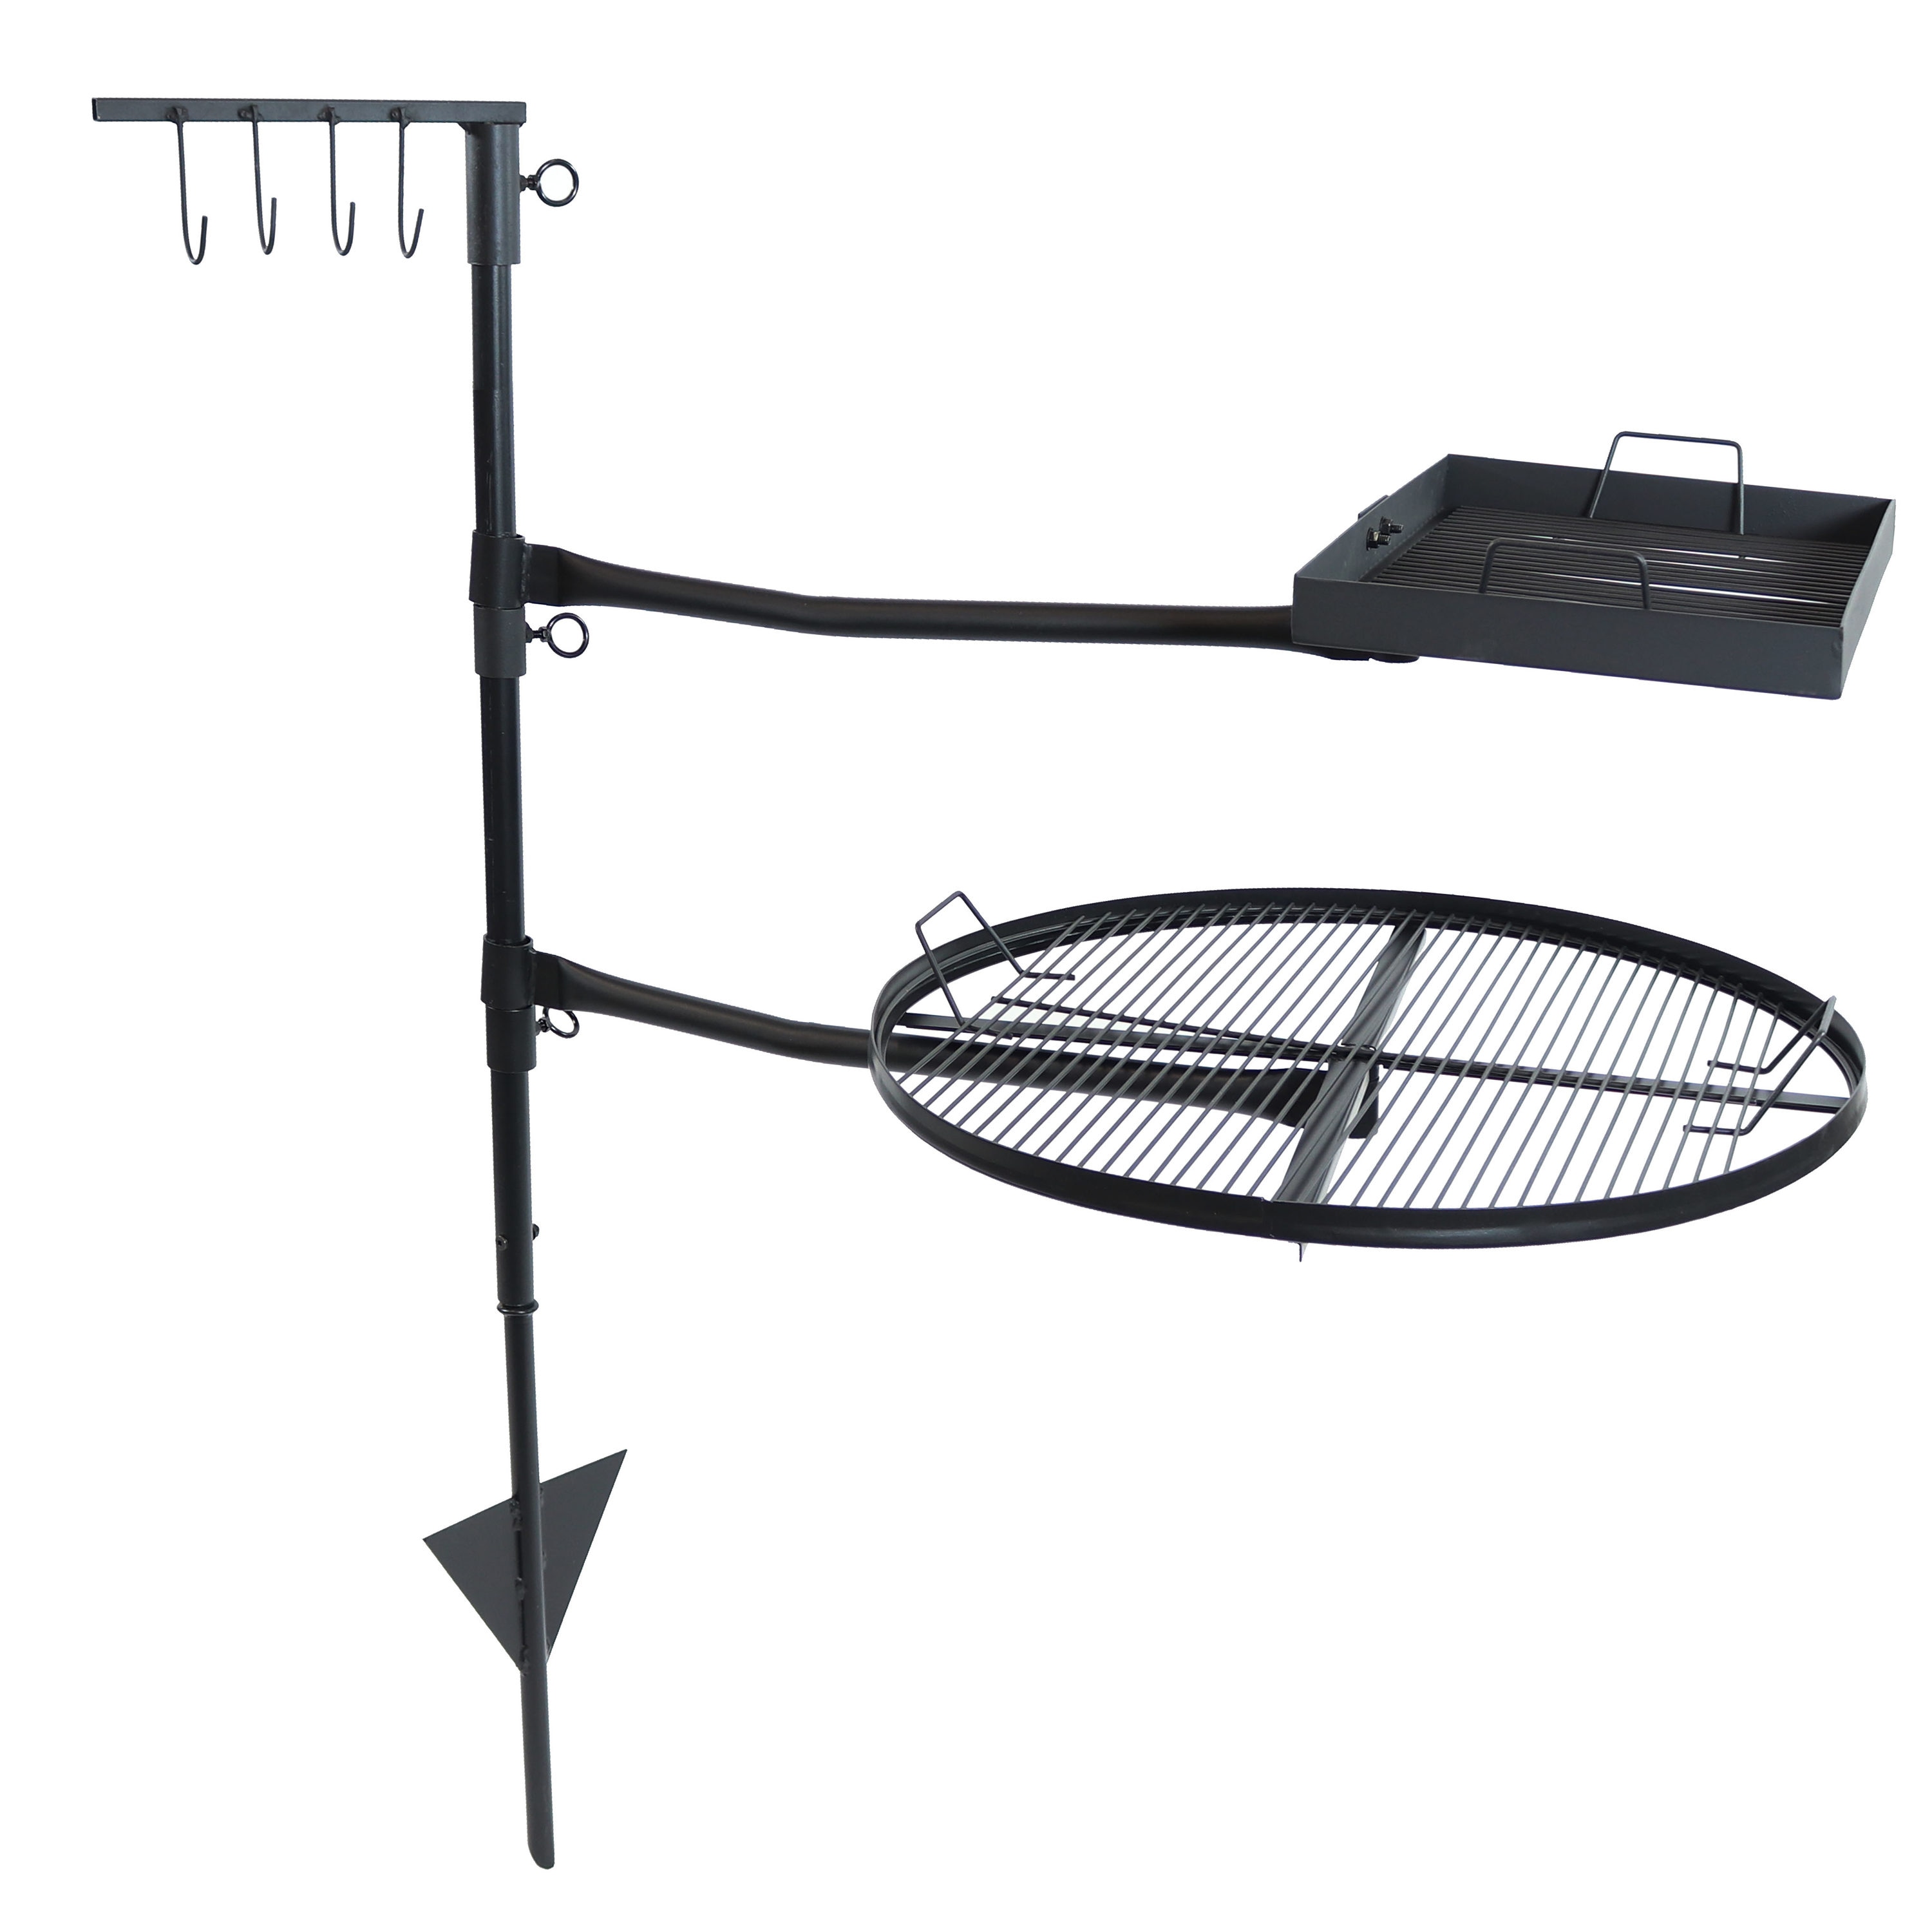 Swing Grill Campfire Cooking Stand Outdoor Picnic Cookware Bonfire